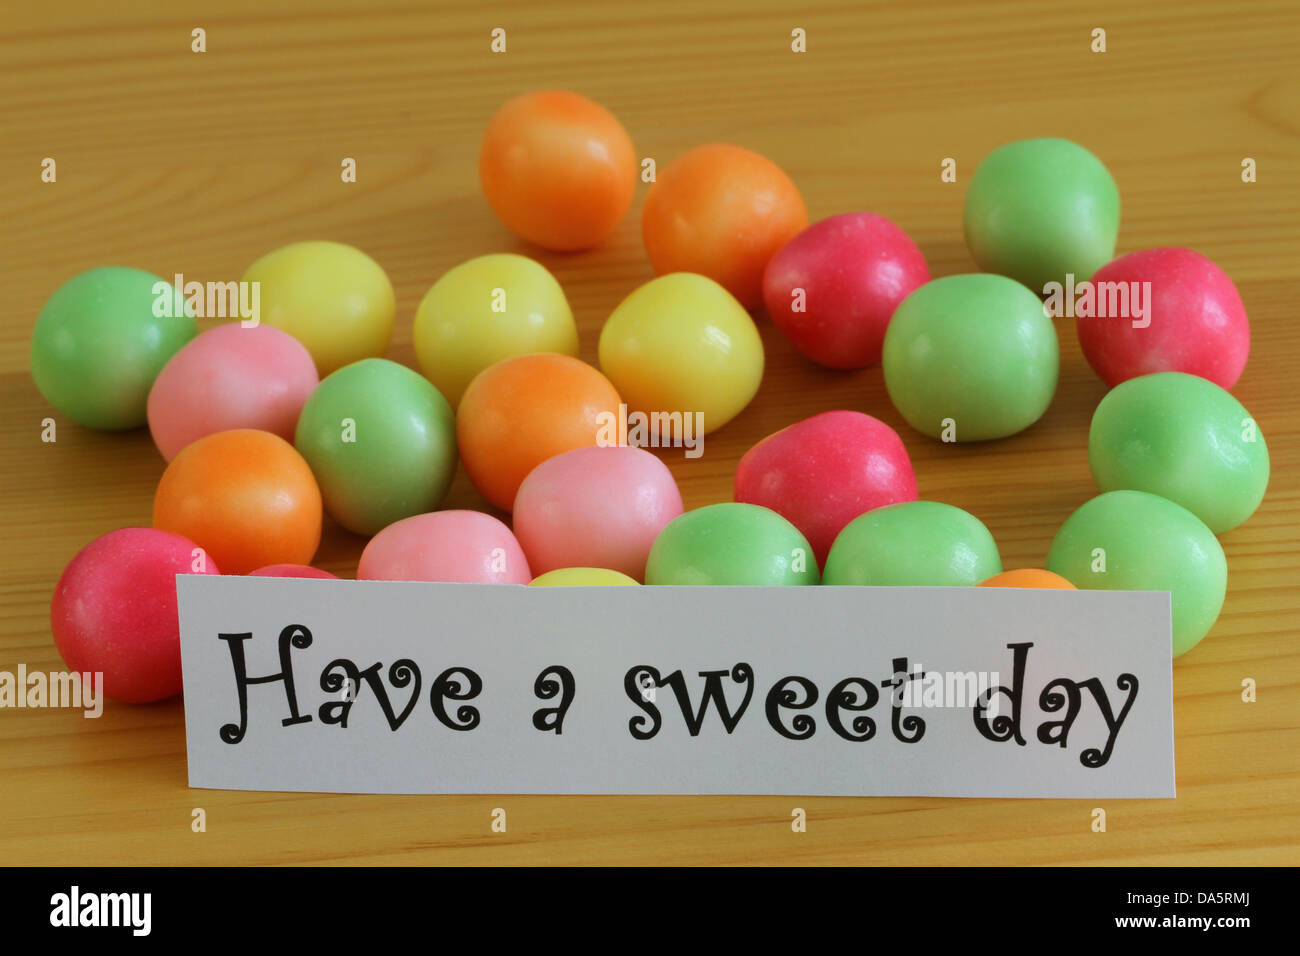 Have a sweet day note and colorful candy Stock Photo